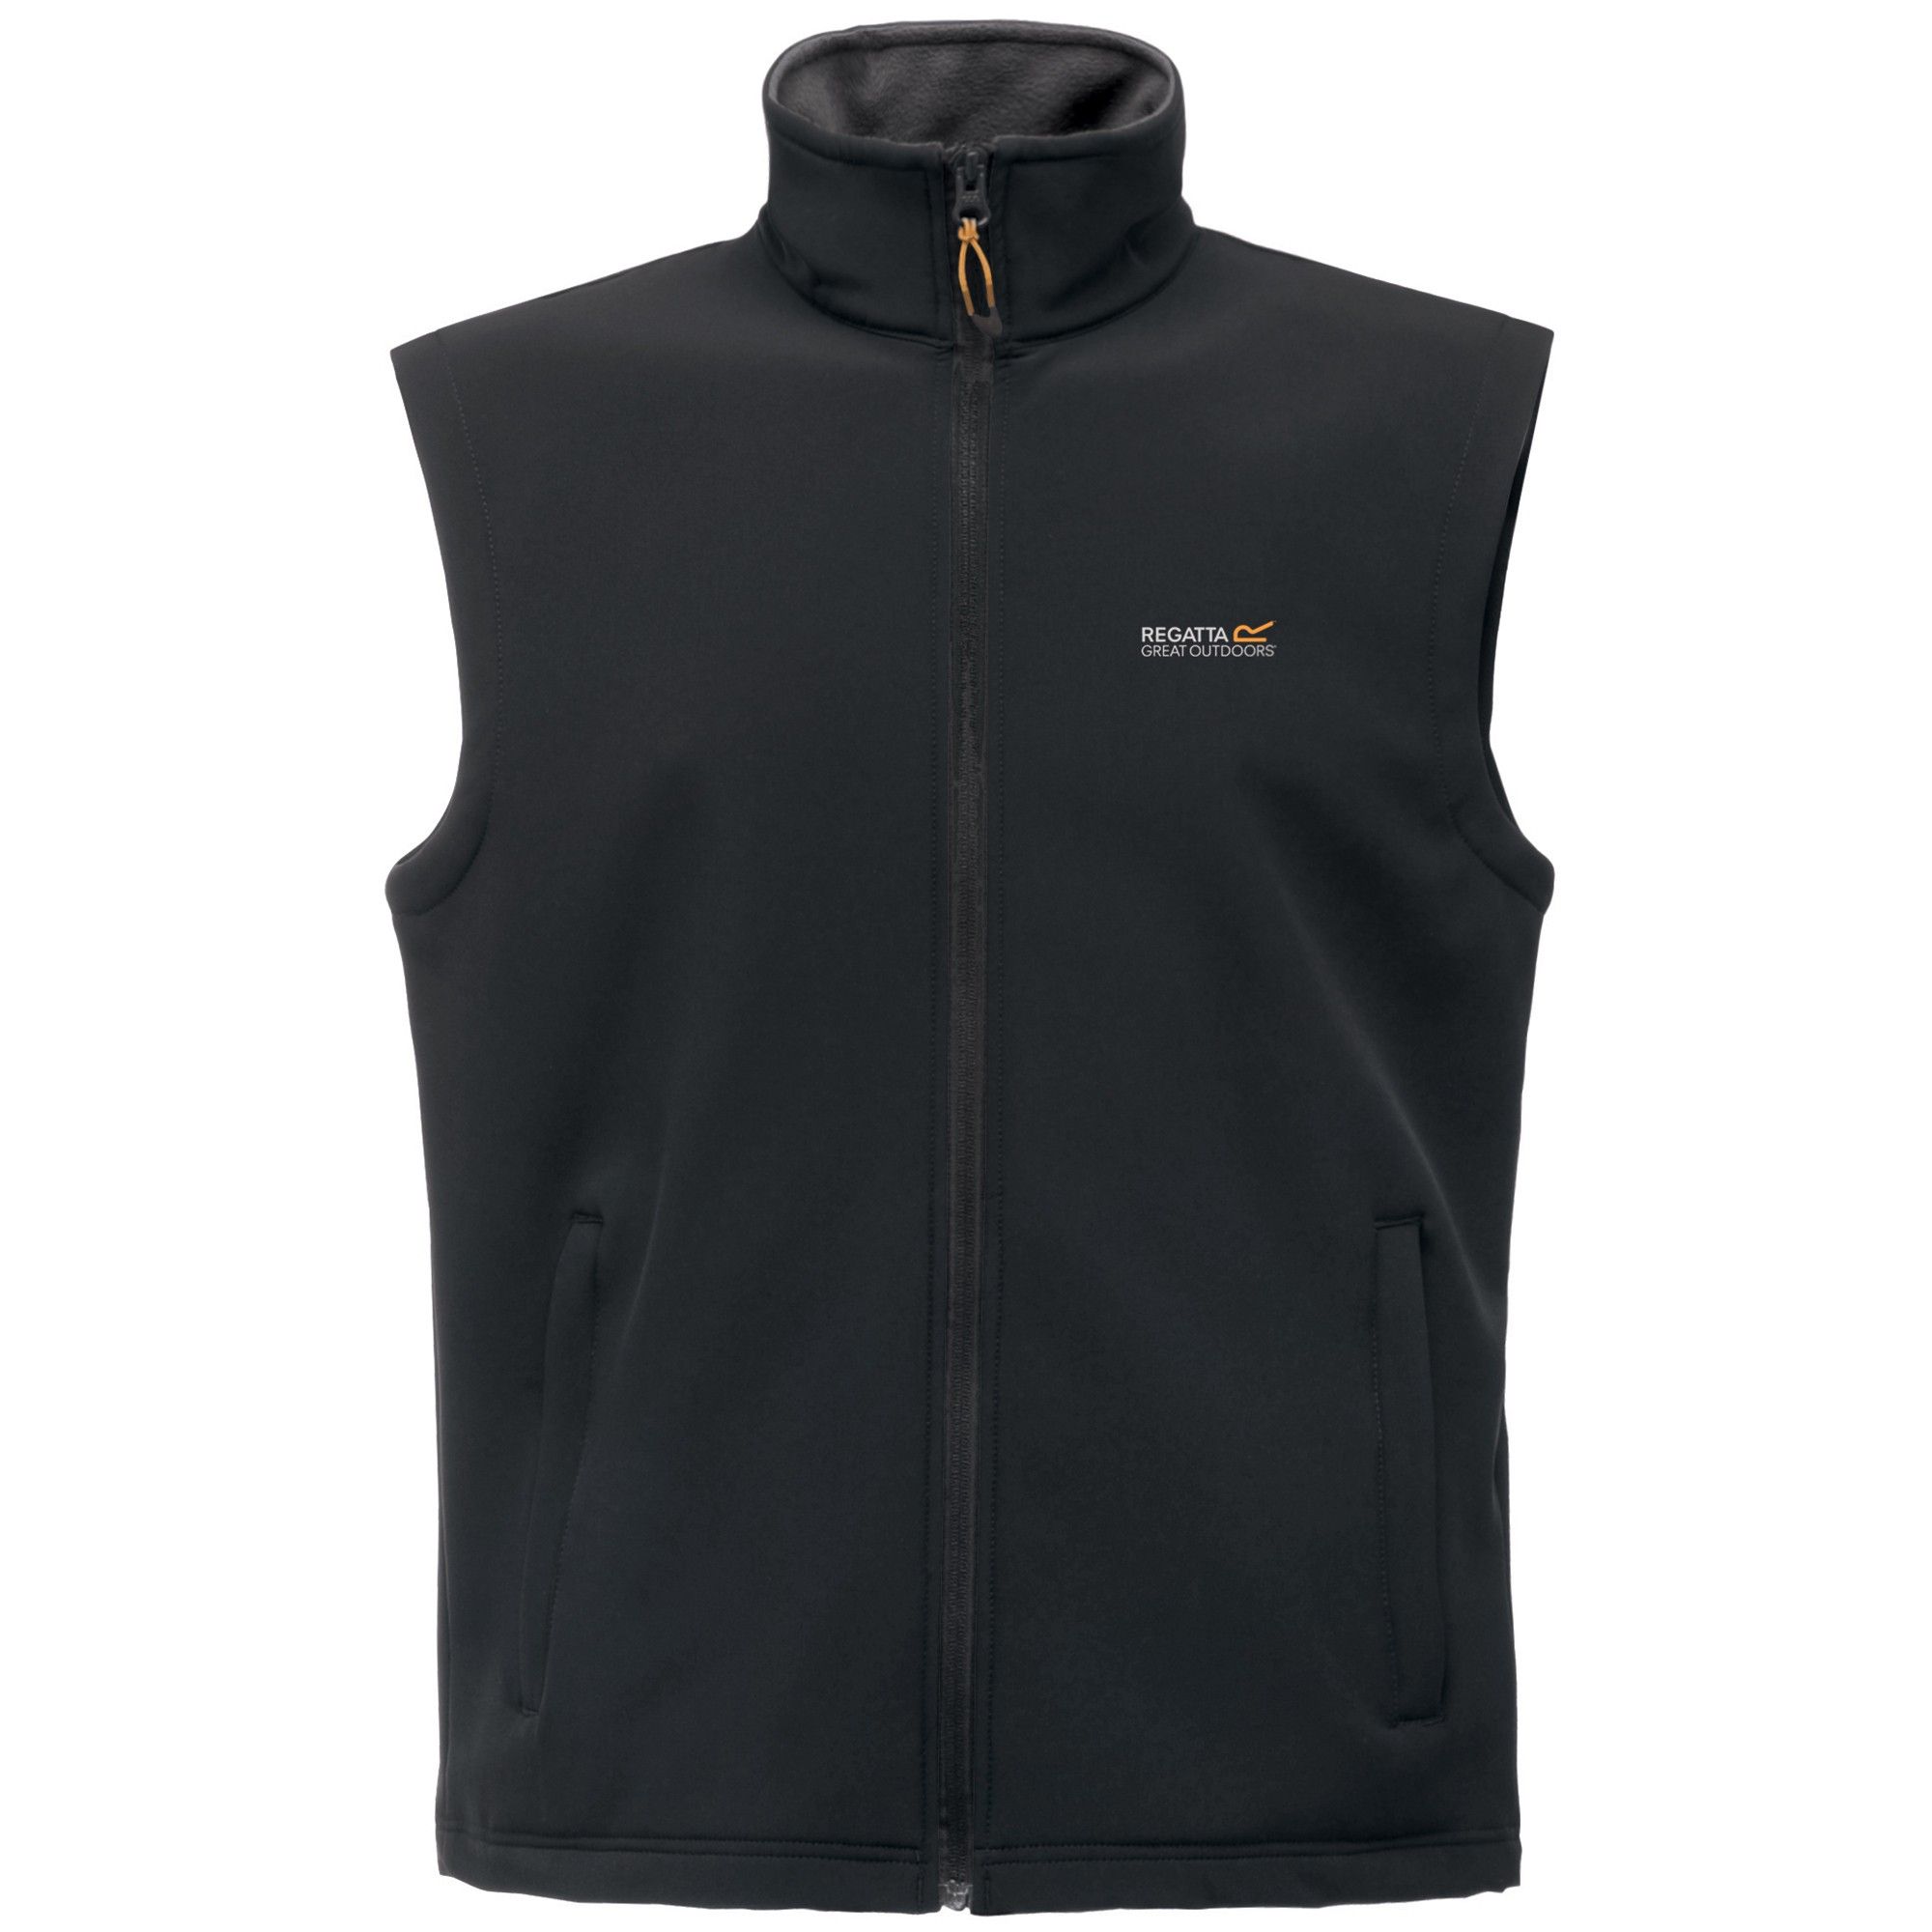 The mens Bradwell Softshell Bodywarmer is a light and dependable layer across the seasons. The warm backed fabric keeps wind and showers at bay while giving you the freedom to move. Designed with a relaxed, everyday fit and two handy zipped pockets (for keys, phones or dogs treats), it works well as a standalone jacket or as a warming mid-layer during cold spells. 96% Polyester, 4% Elastane. Regatta Mens sizing (chest approx): XS (35-36in/89-91.5cm), S (37-38in/94-96.5cm), M (39-40in/99-101.5cm), L (41-42in/104-106.5cm), XL (43-44in/109-112cm), XXL (46-48in/117-122cm), XXXL (49-51in/124.5-129.5cm), XXXXL (52-54in/132-137cm), XXXXXL (55-57in/140-145cm).